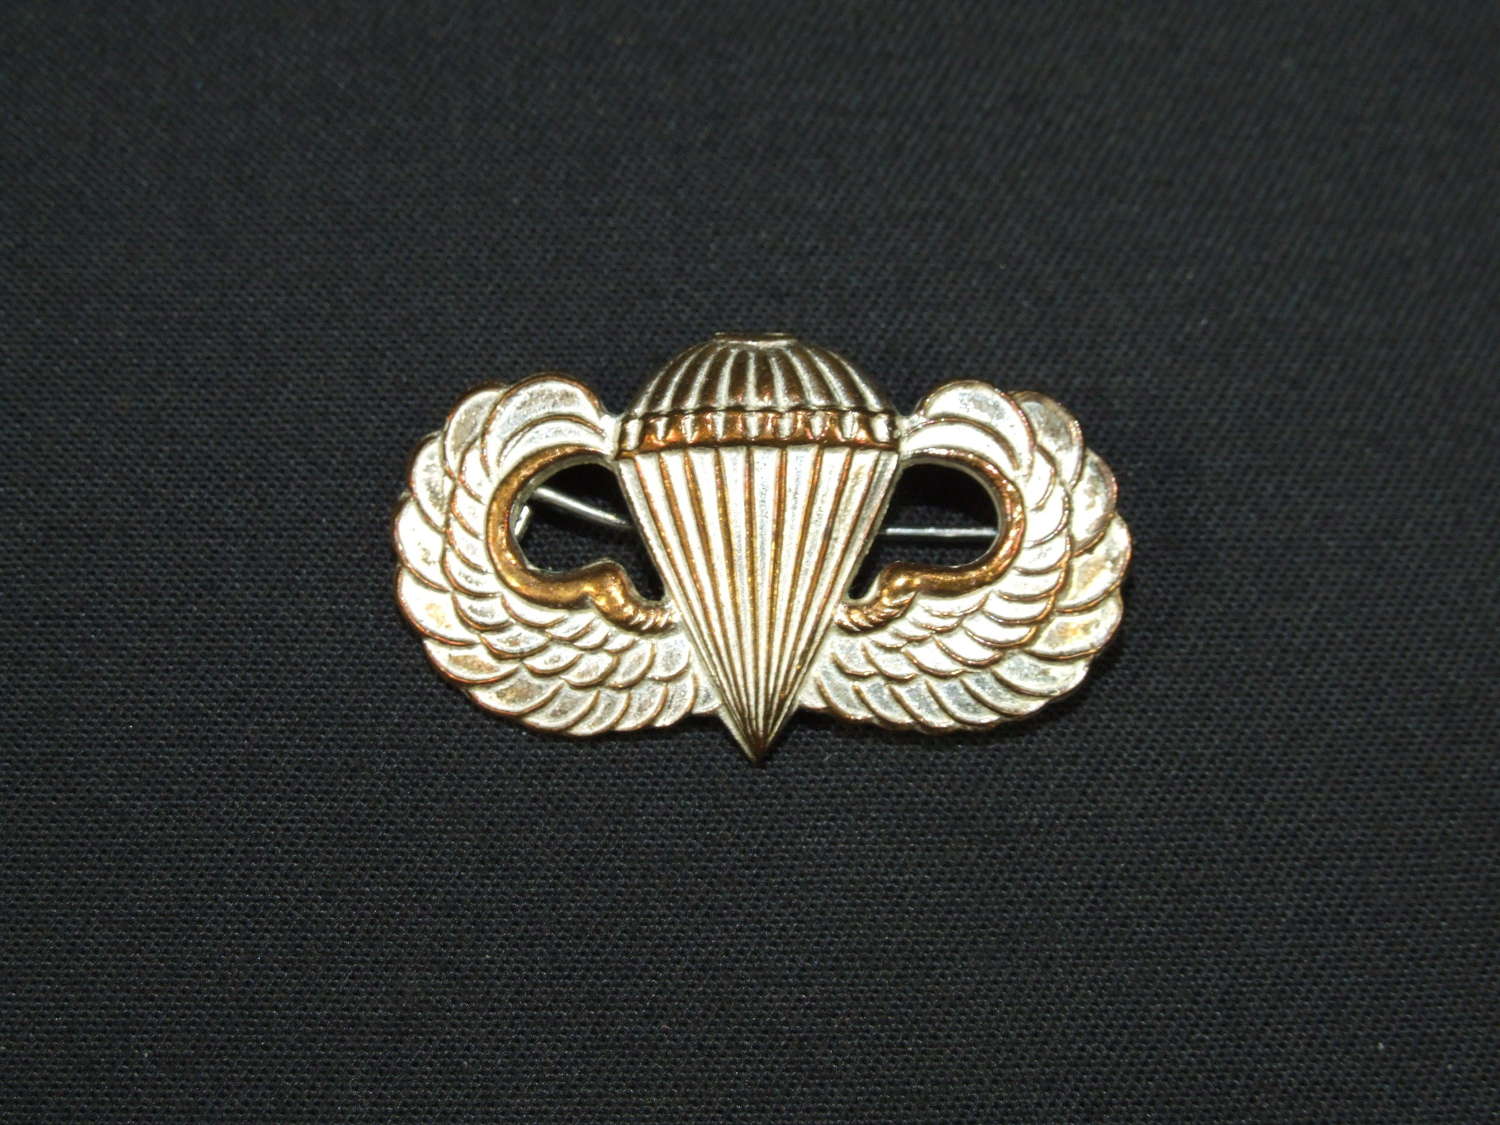 British Made US Paratrooper Jump Wings by S.S. Ltd. B